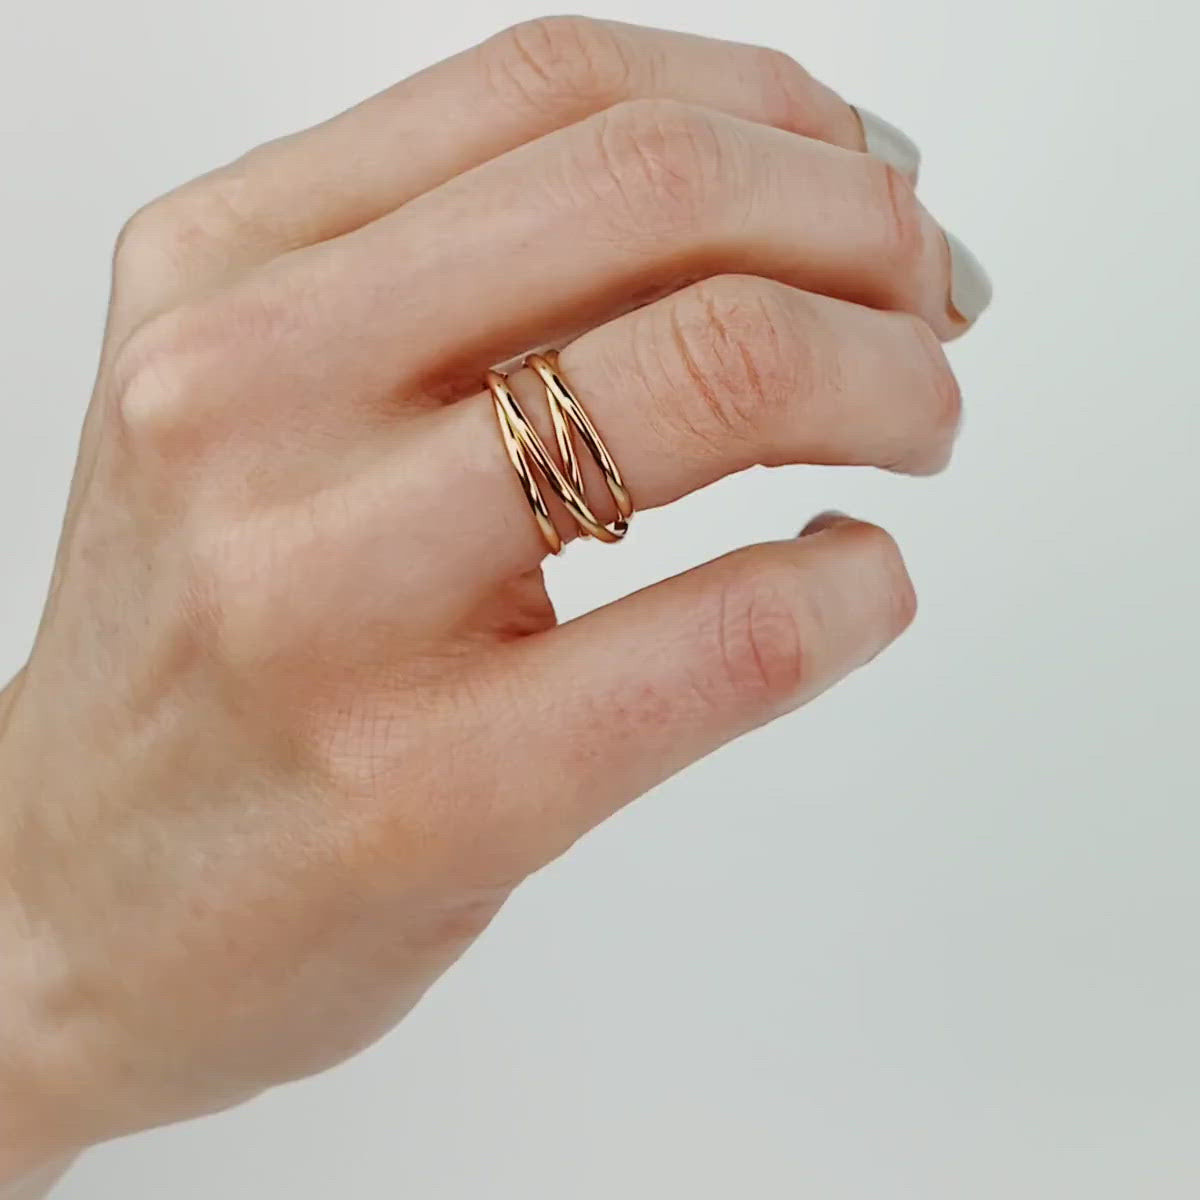 Woven Thick Band Ring